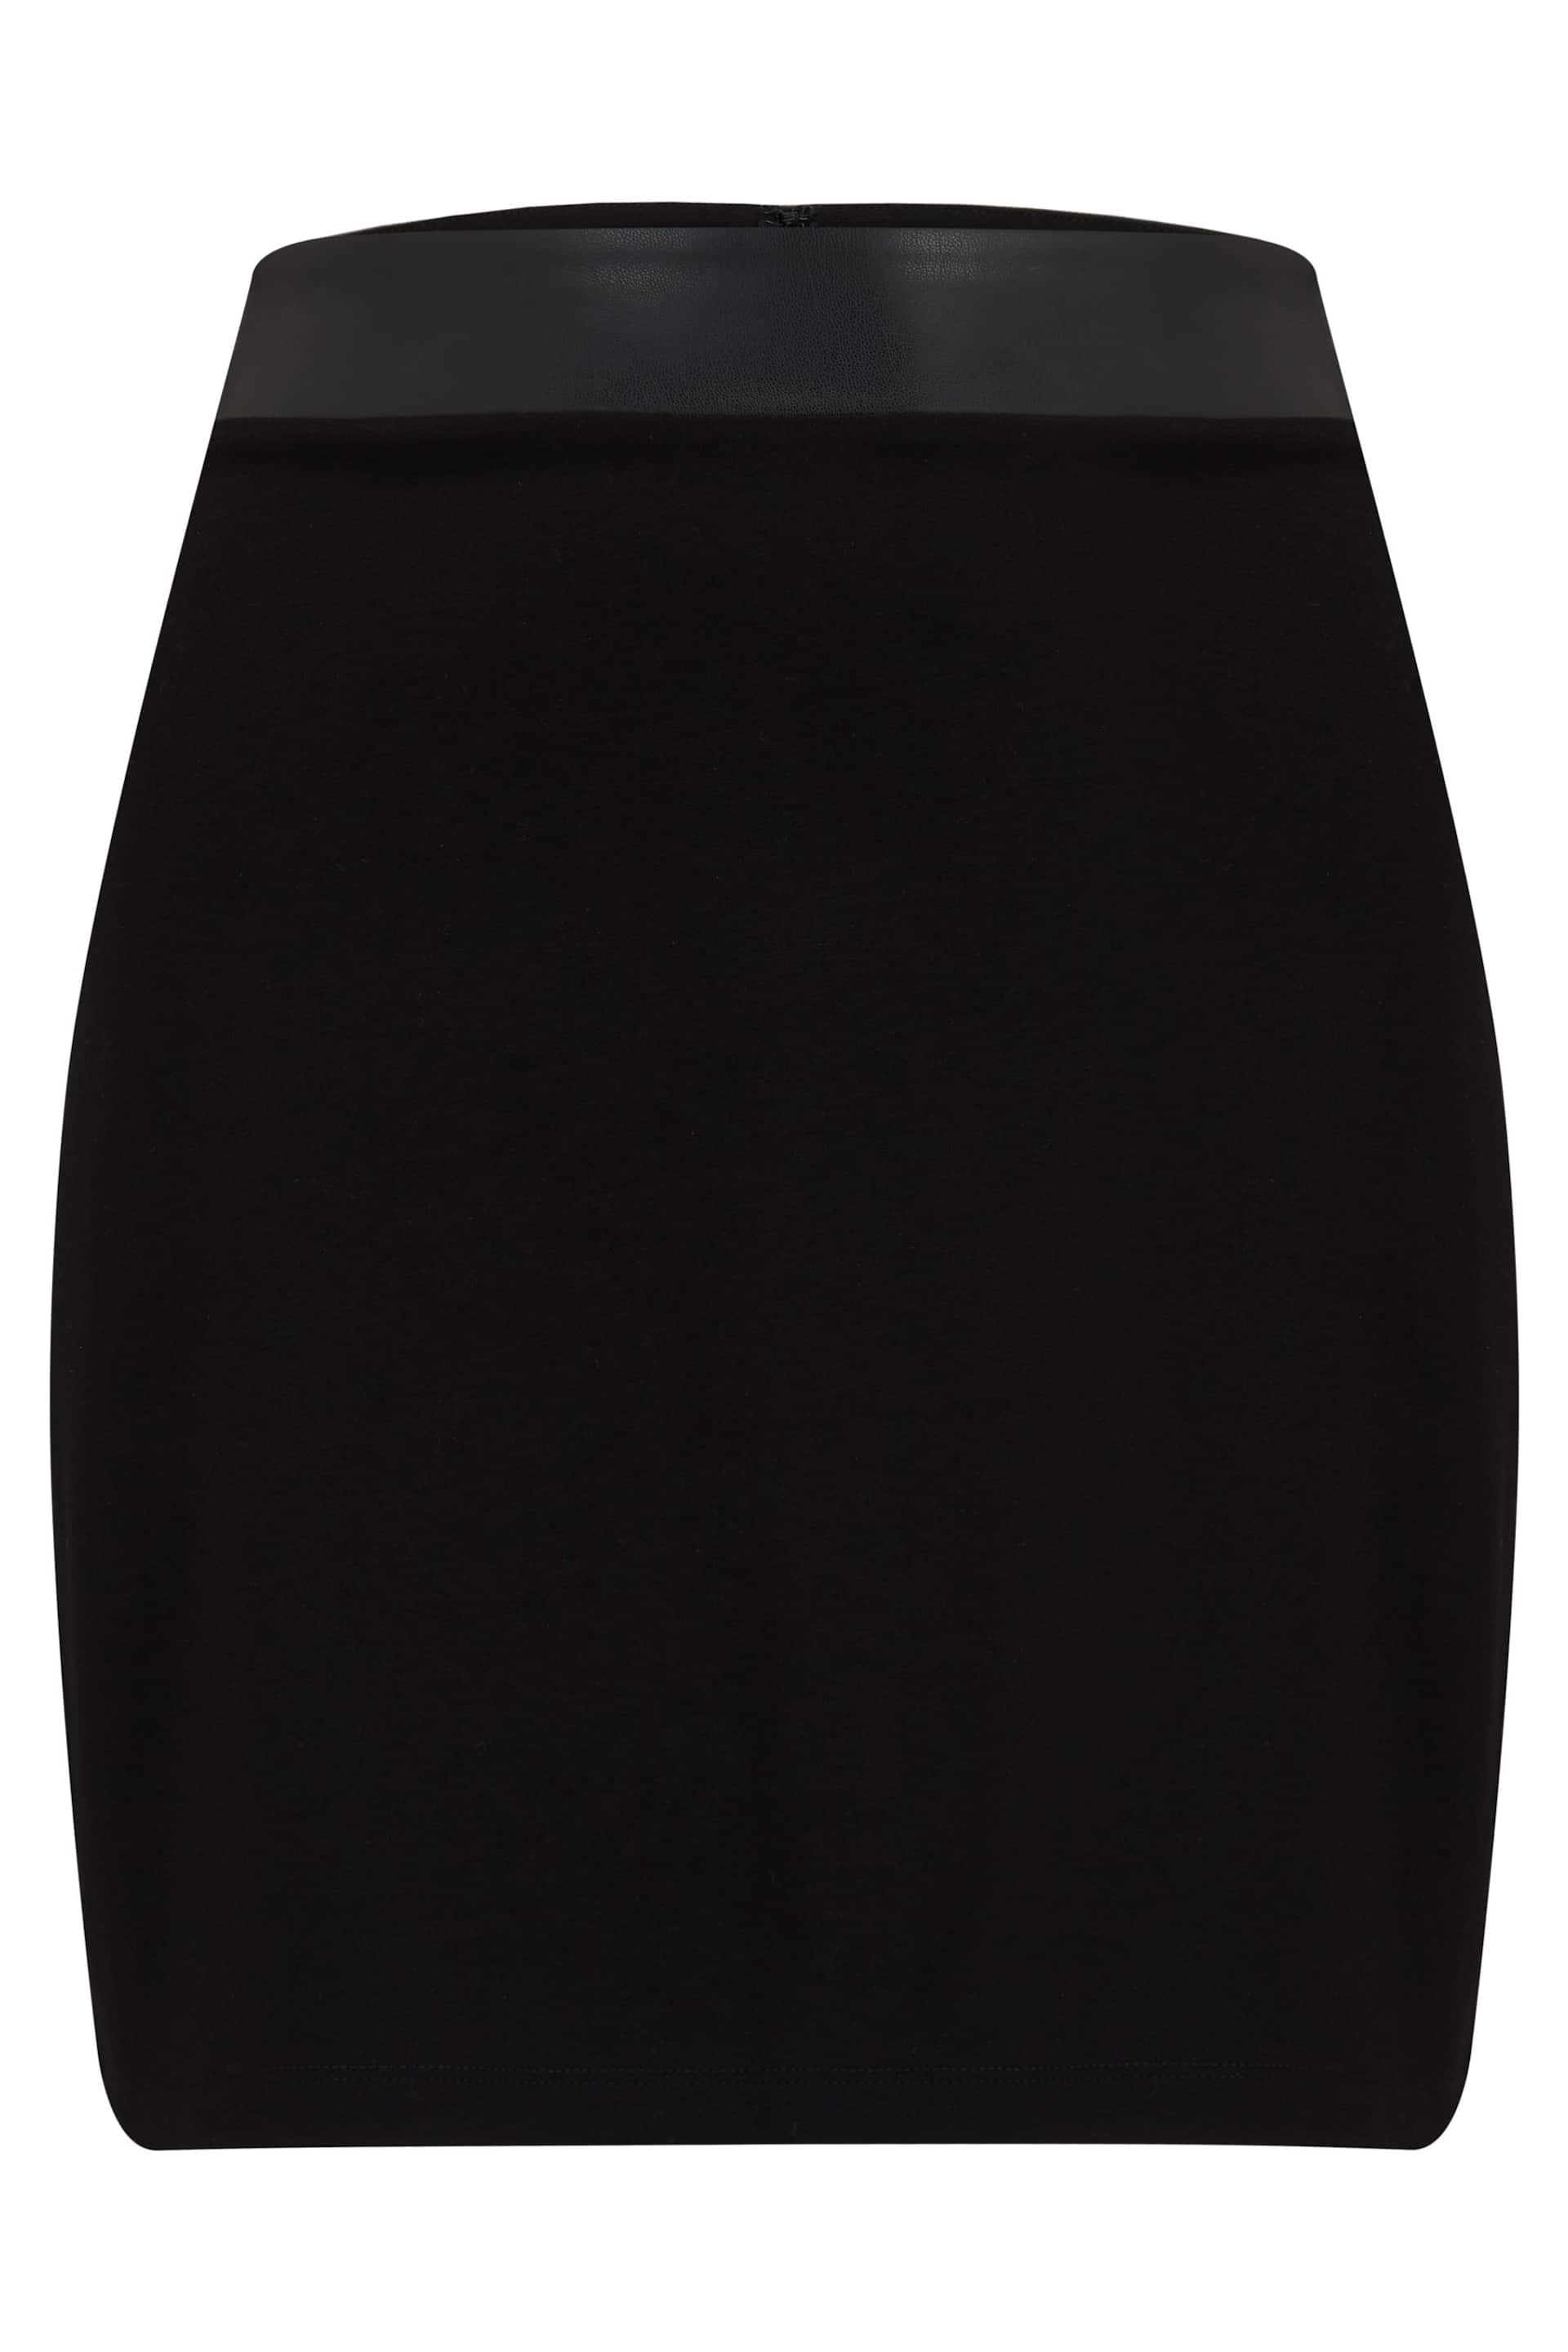 Pour Moi Black Amy Faux Leather Skirt - Image 4 of 5